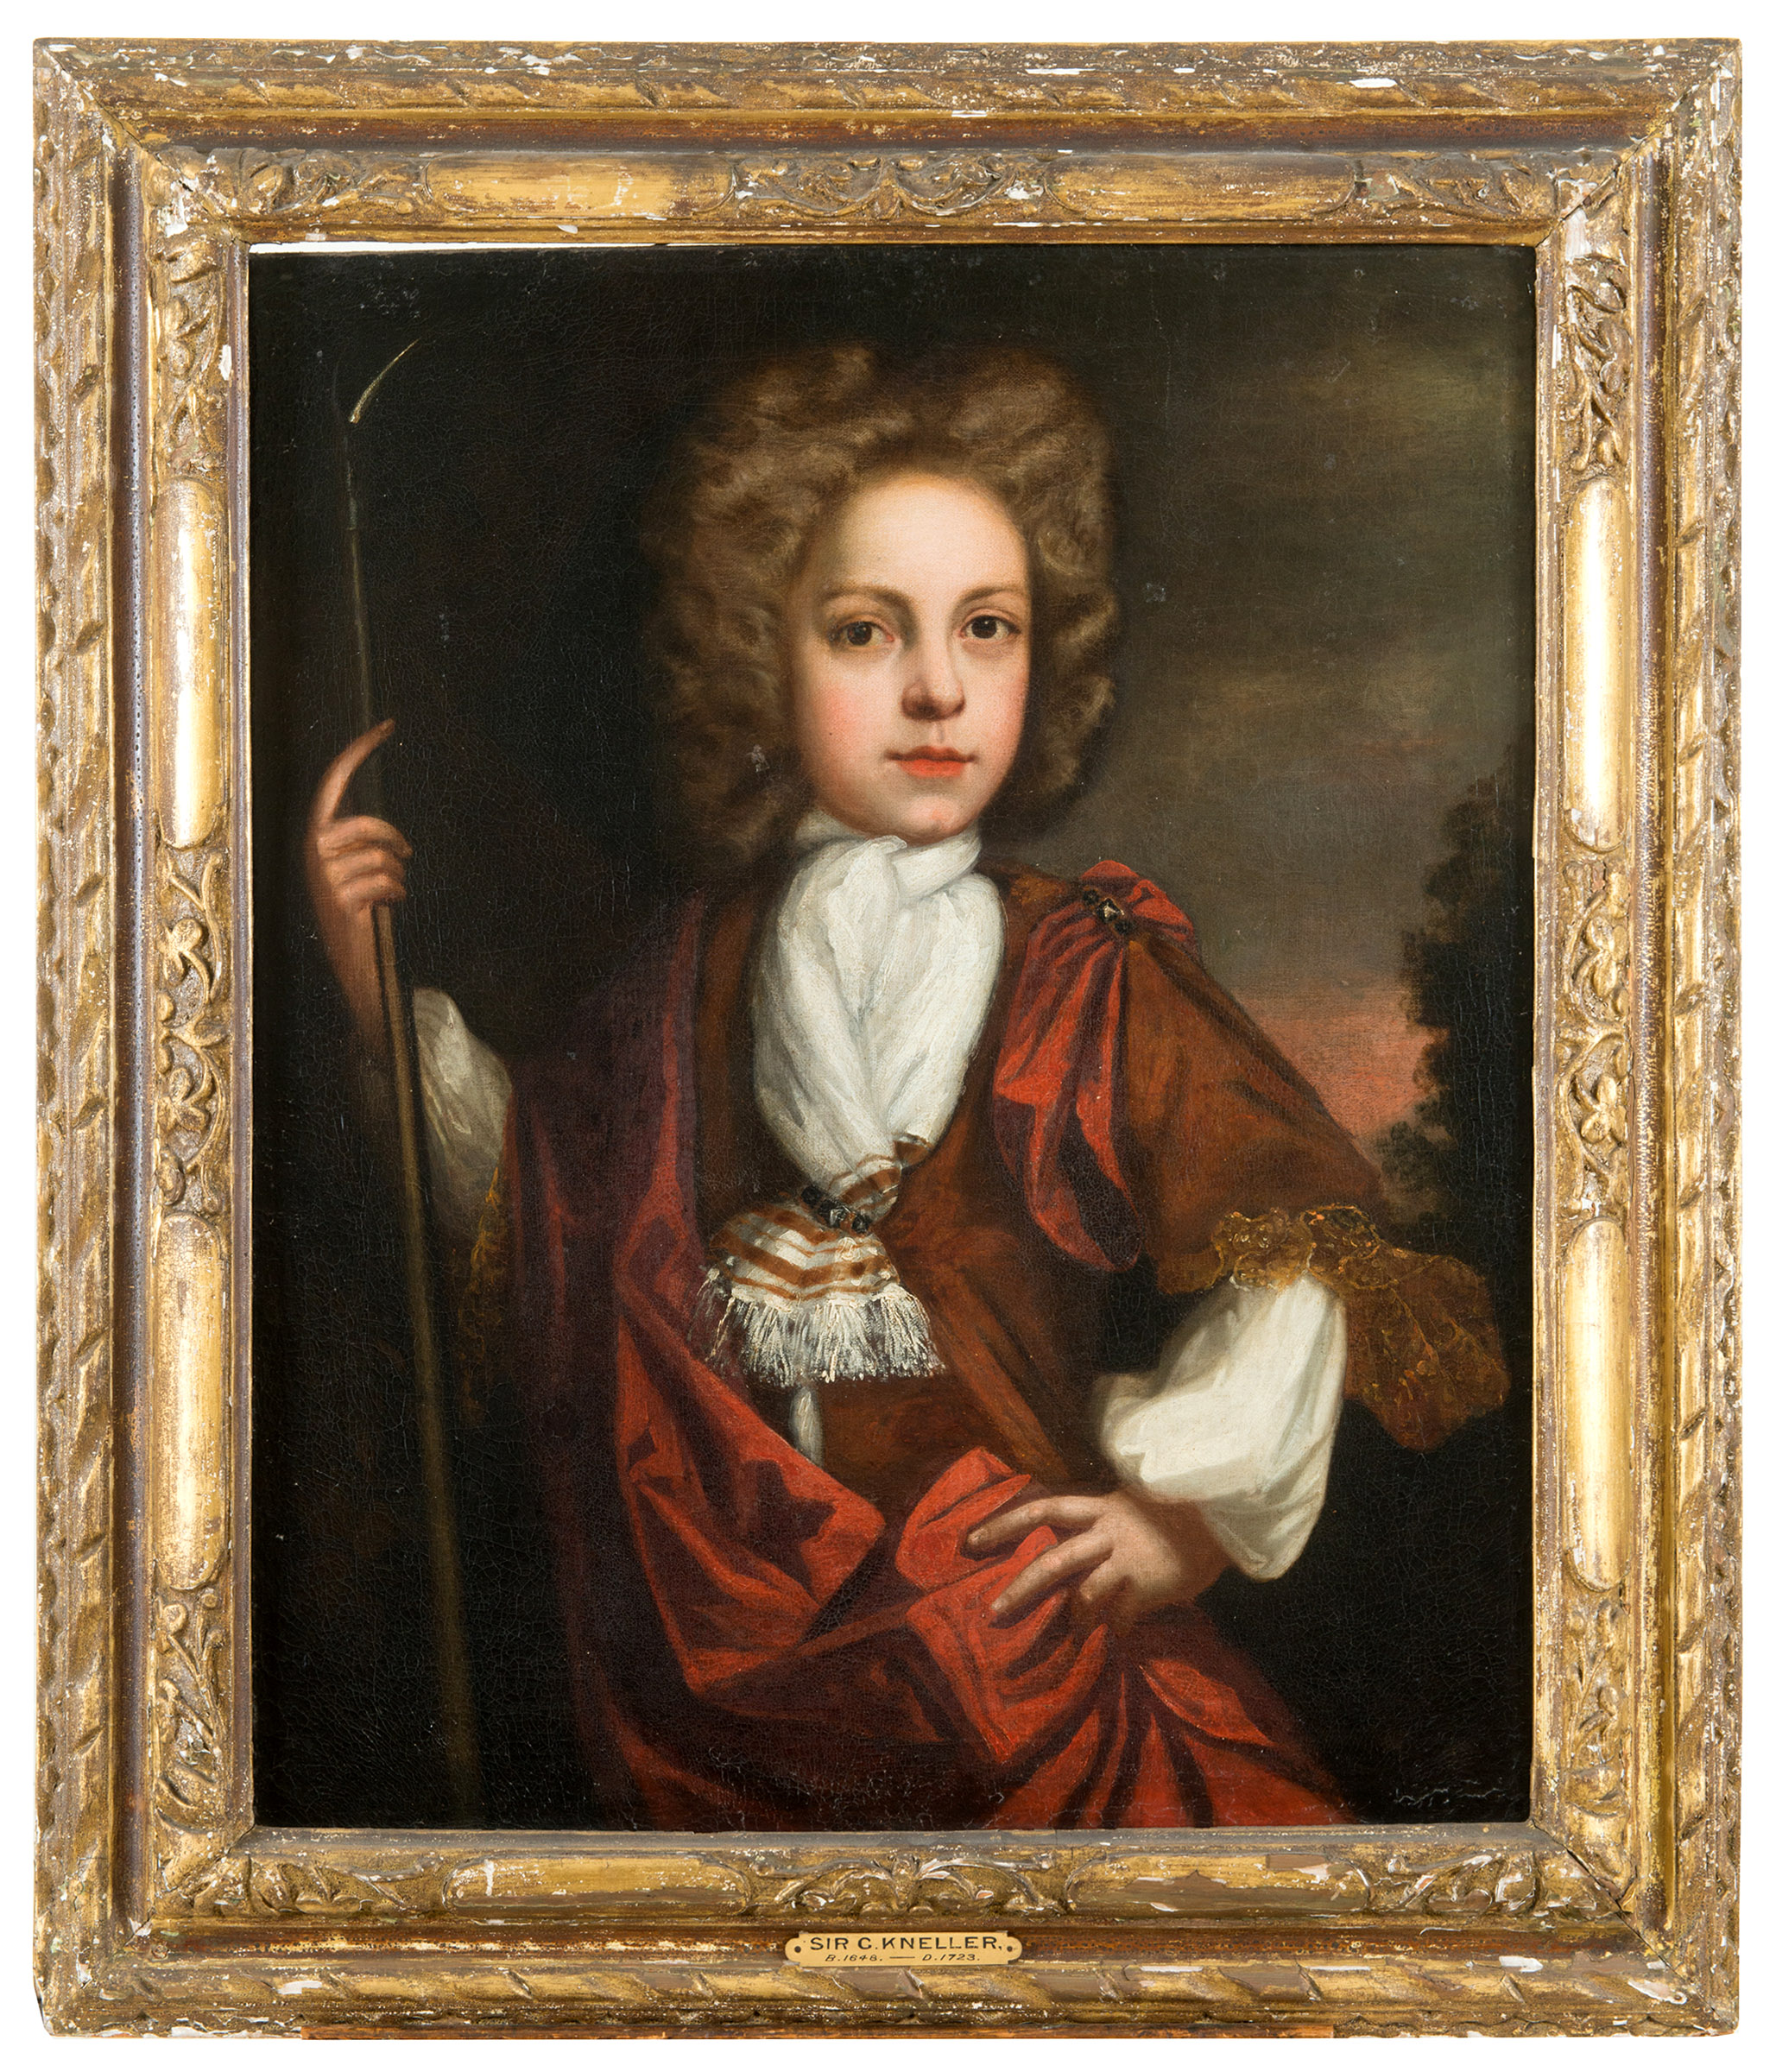 CIRCLE OF SAMUEL KING (Fl.c.1690's) PORTRAIT OF A BOY, AGED 9 Half length, wearing a wig, a red